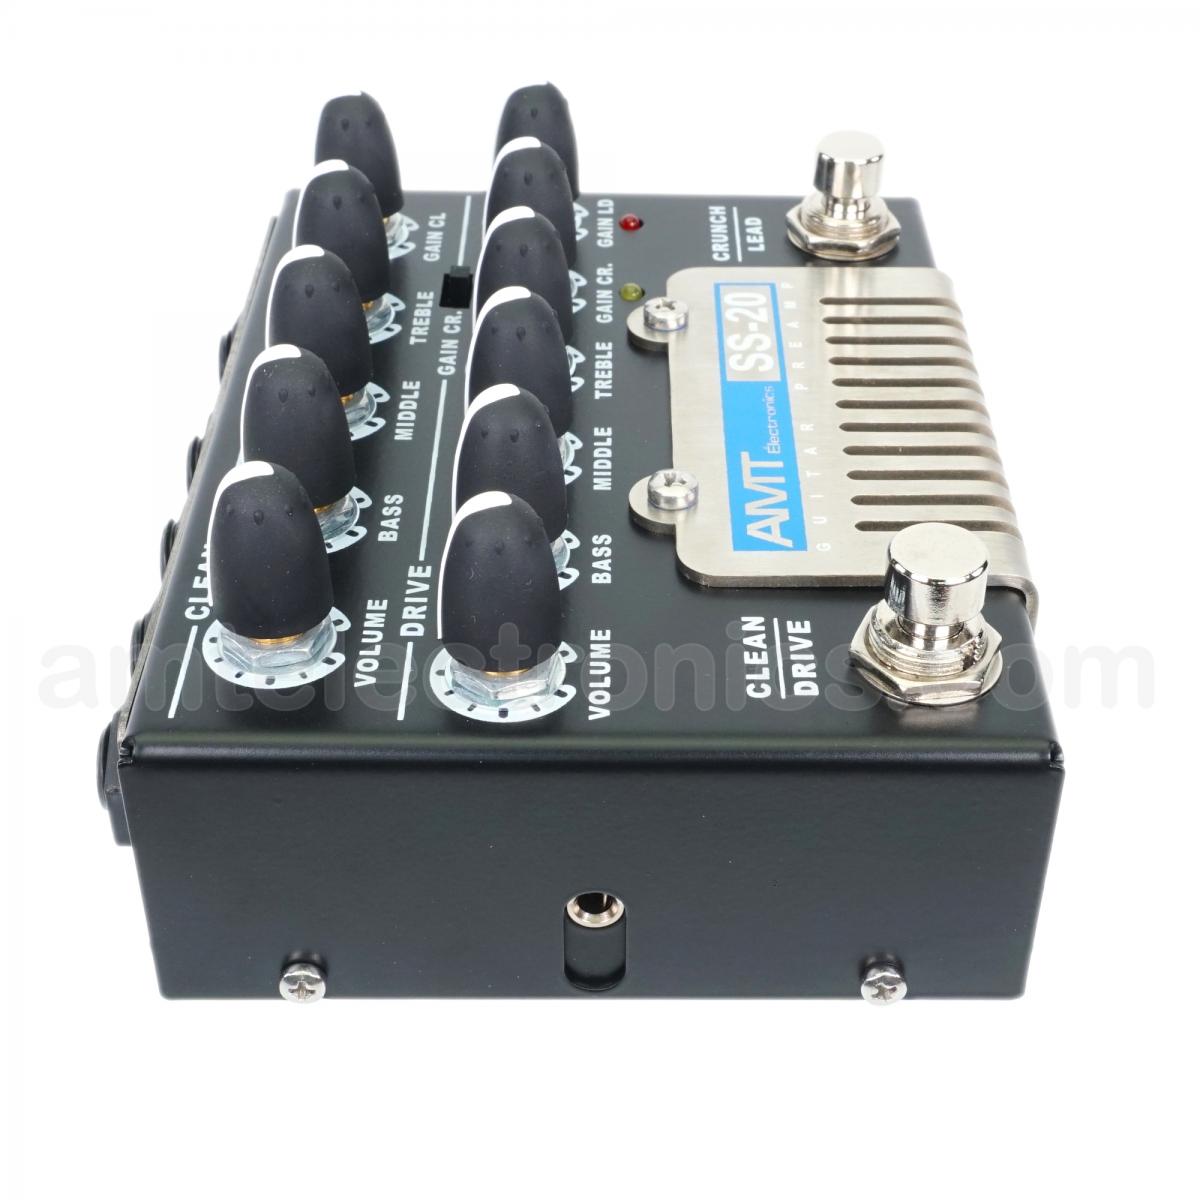 AMT SS-20 (Studio Series preamp) | AMT Electronics official website